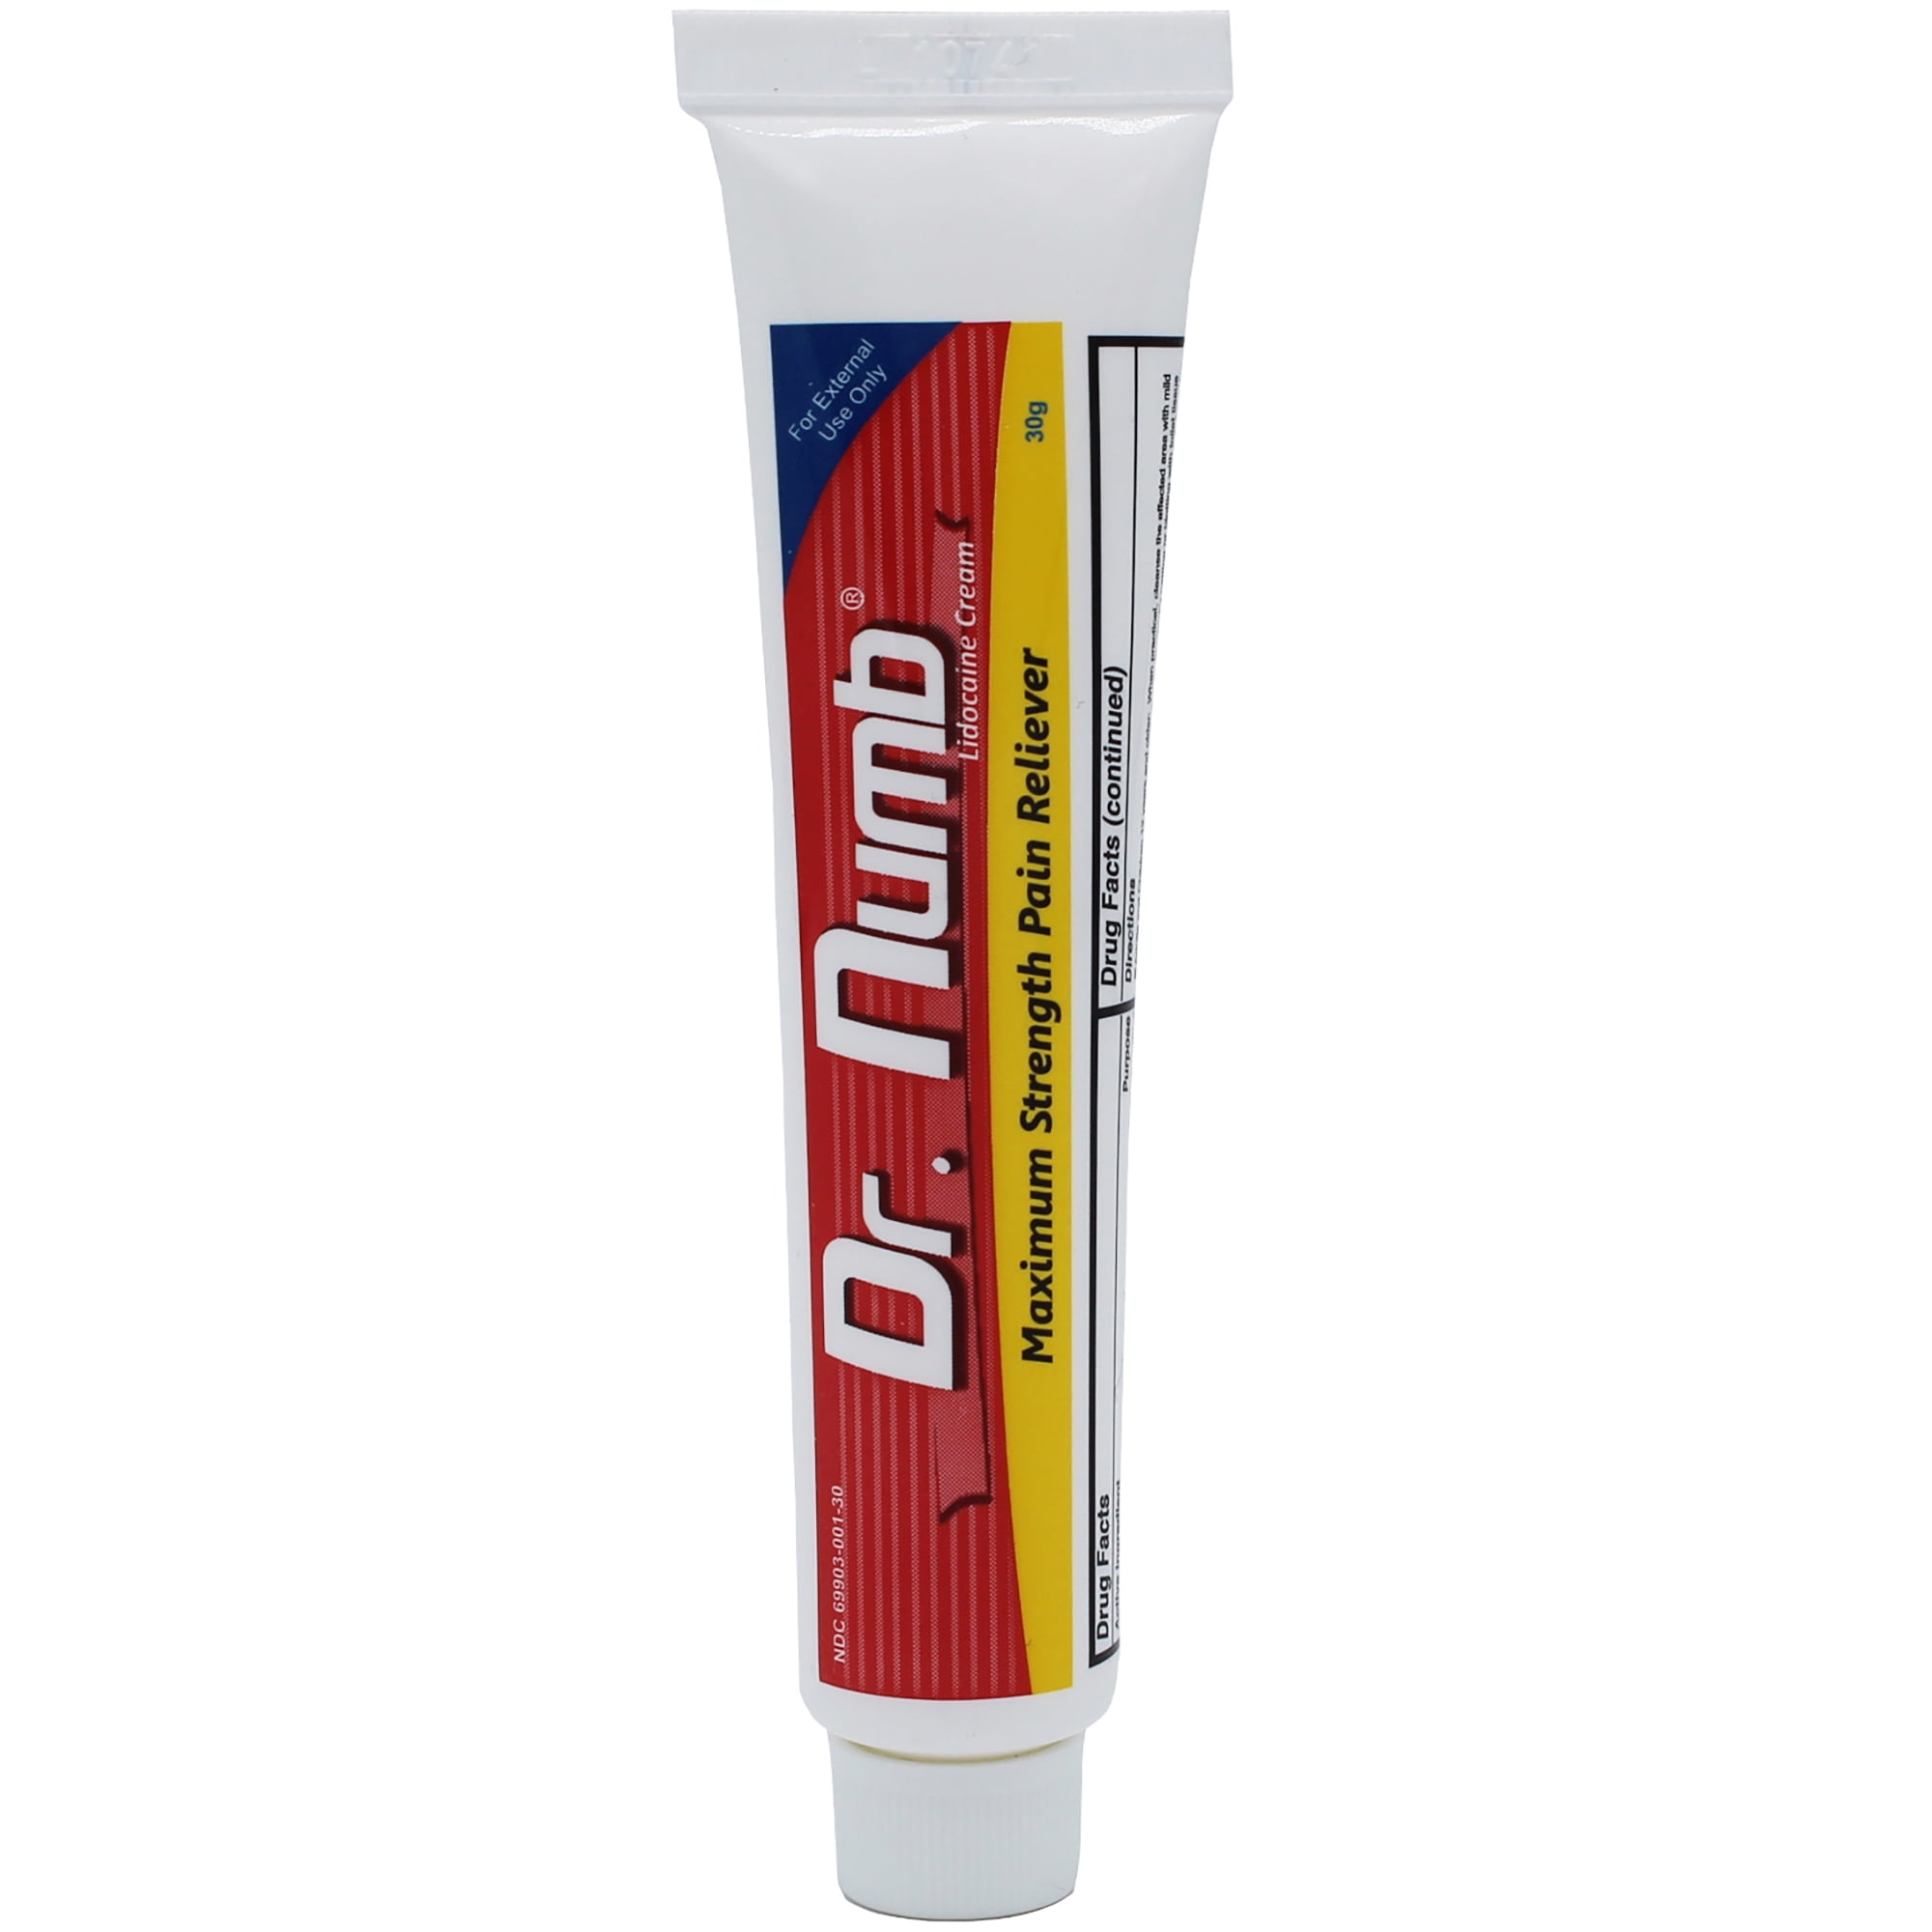 Dr. Numb 5% Lidocaine Topical Anesthetic Numbing Cream for Pain Relief, Maximum Strength with Vitamin E for Real Time Relieves of Local Discomfort, Itching, Pain, Soreness or Burning - 30g - Walmart.com